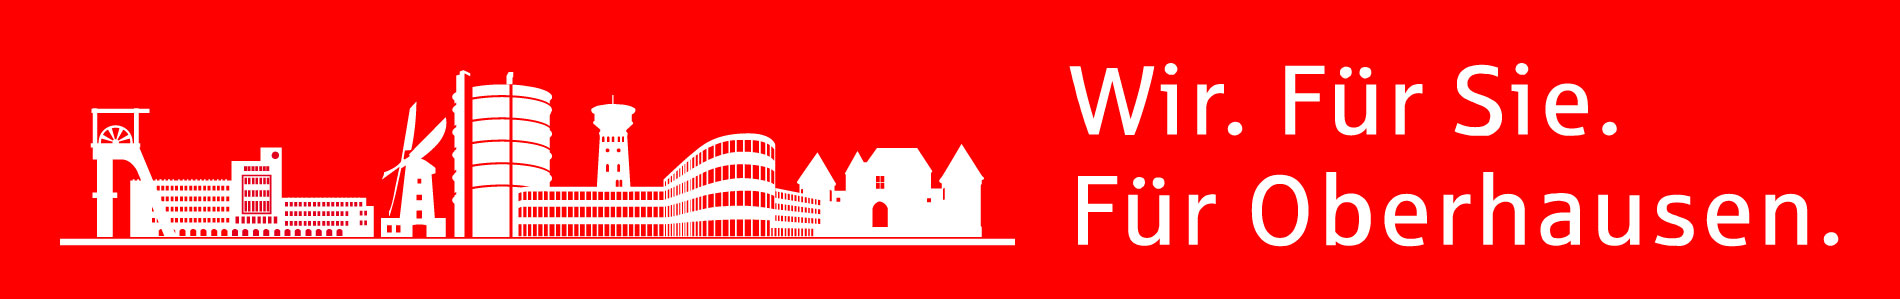 Sparkasse-WFSFO-A_white-red